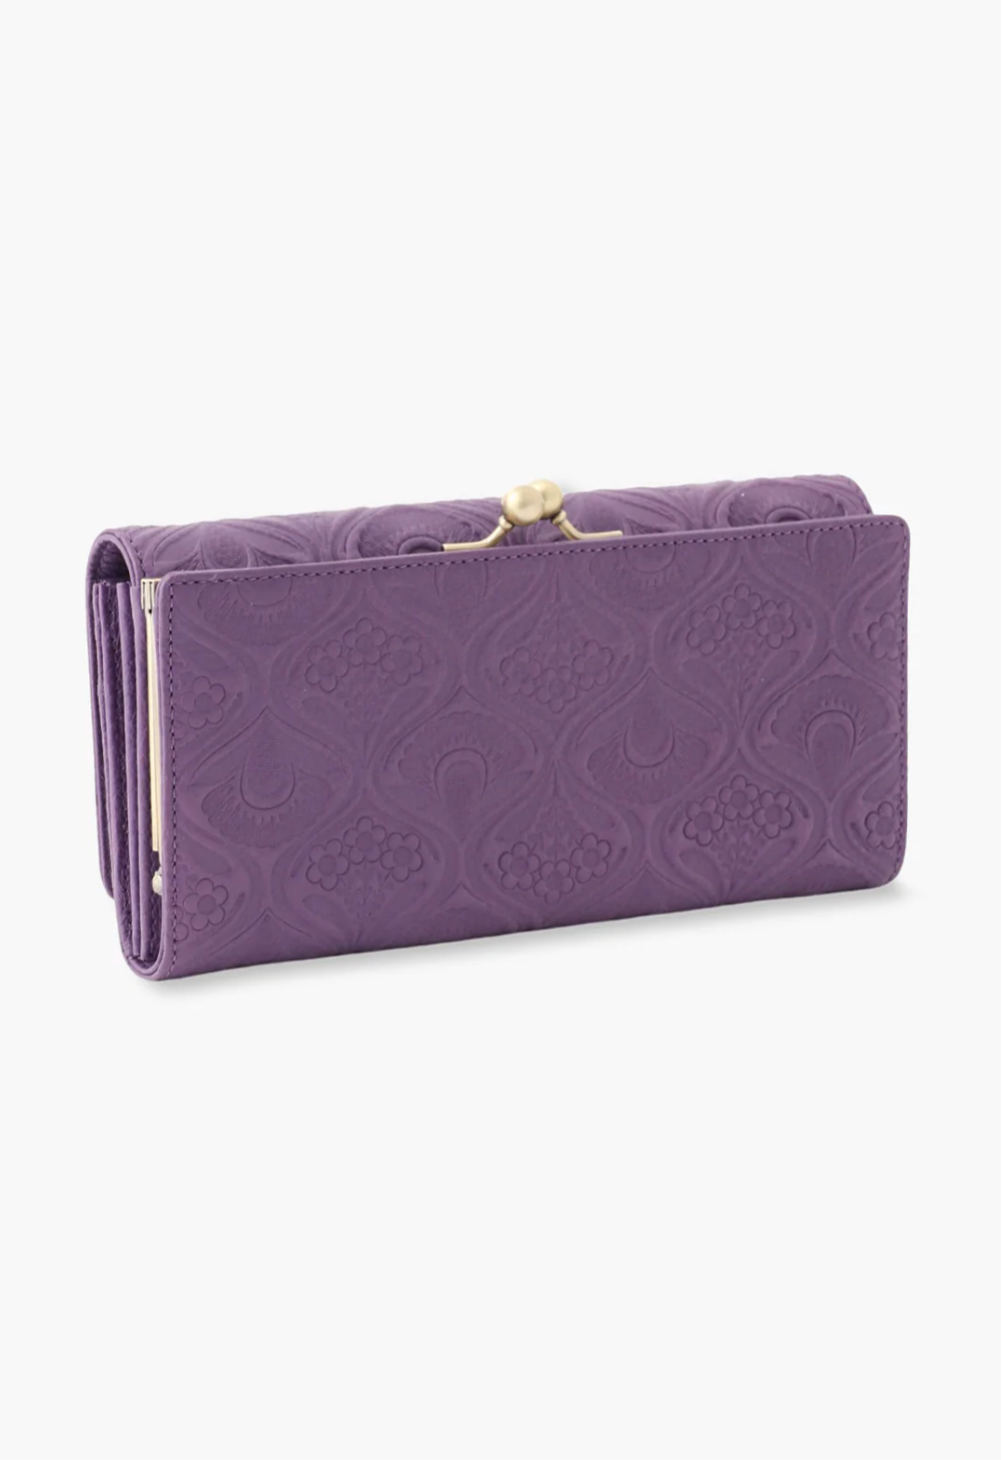 Nova Wallet purple leather wallet with Victorian embossed patterns, golden kiss lock closure